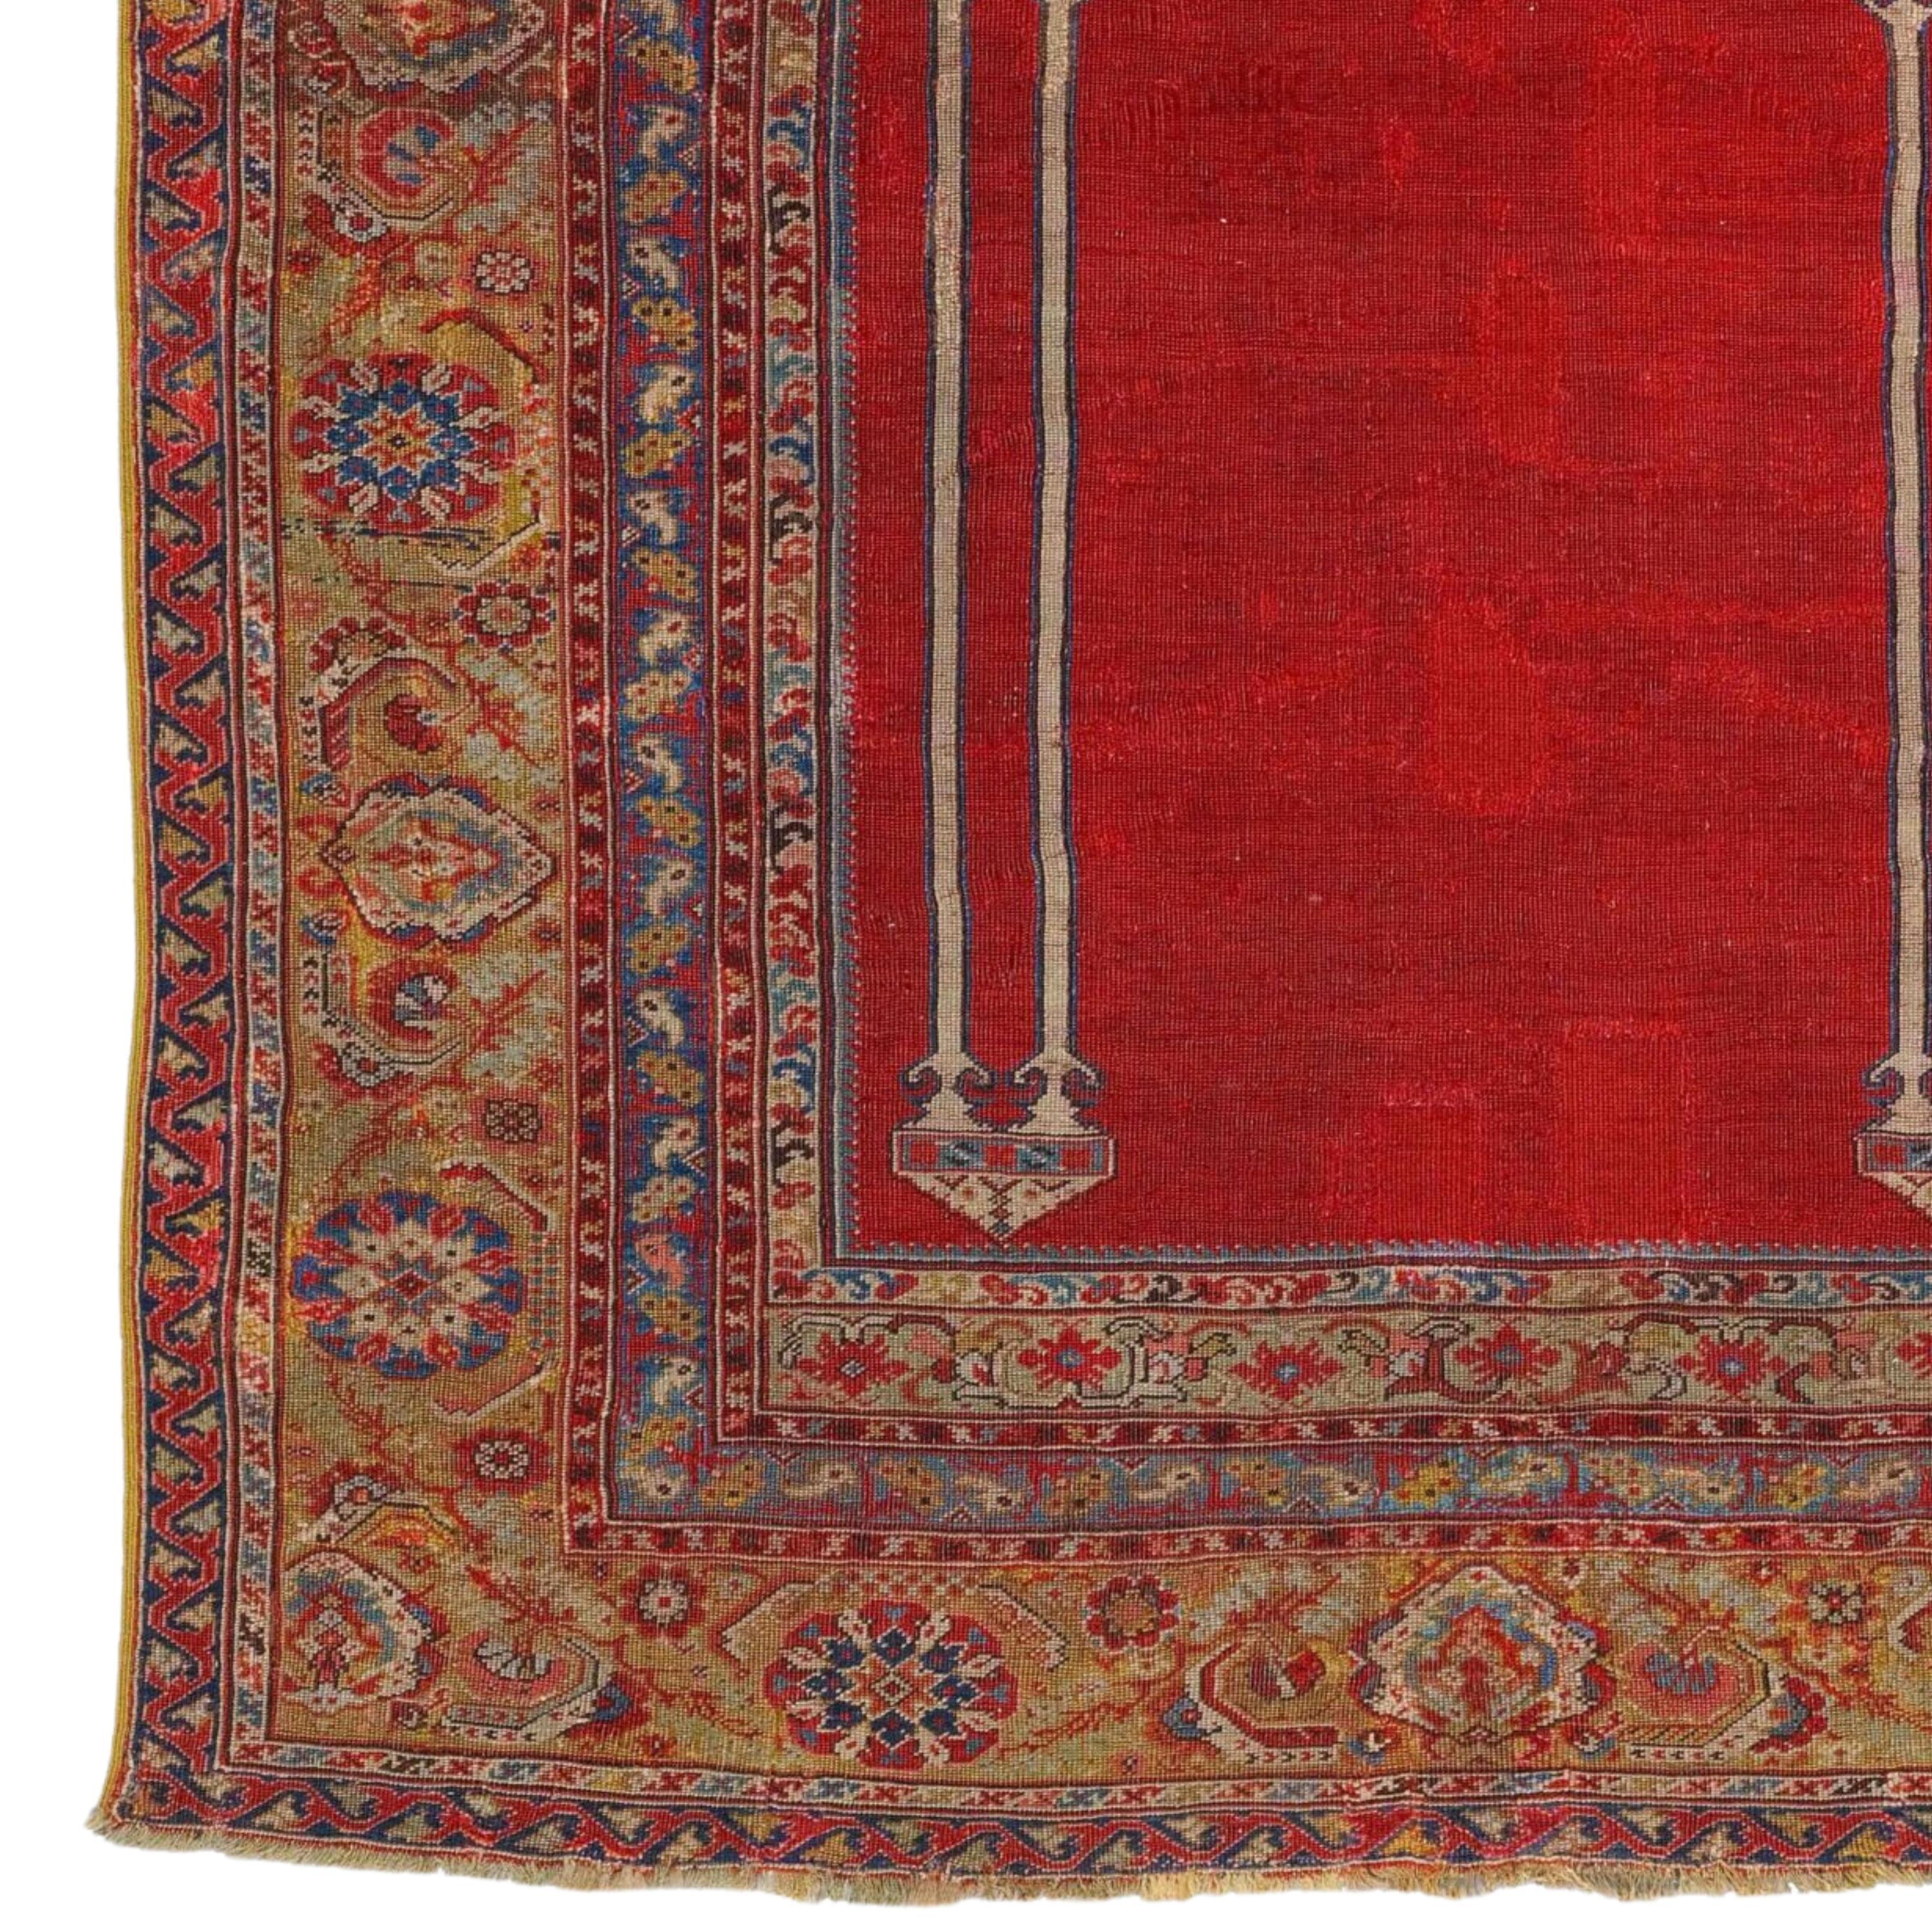 18th Century Anatolian Ghıordes Rug Size 122 x 160 cm

With ‘floating’ columns and an enlarged ‘mosque lamp’ motif dominating the red field of the mihrab, this so-called ‘Basra Ghiordes ‘ prayer rug belongs to a subgroup of 18th century red-ground